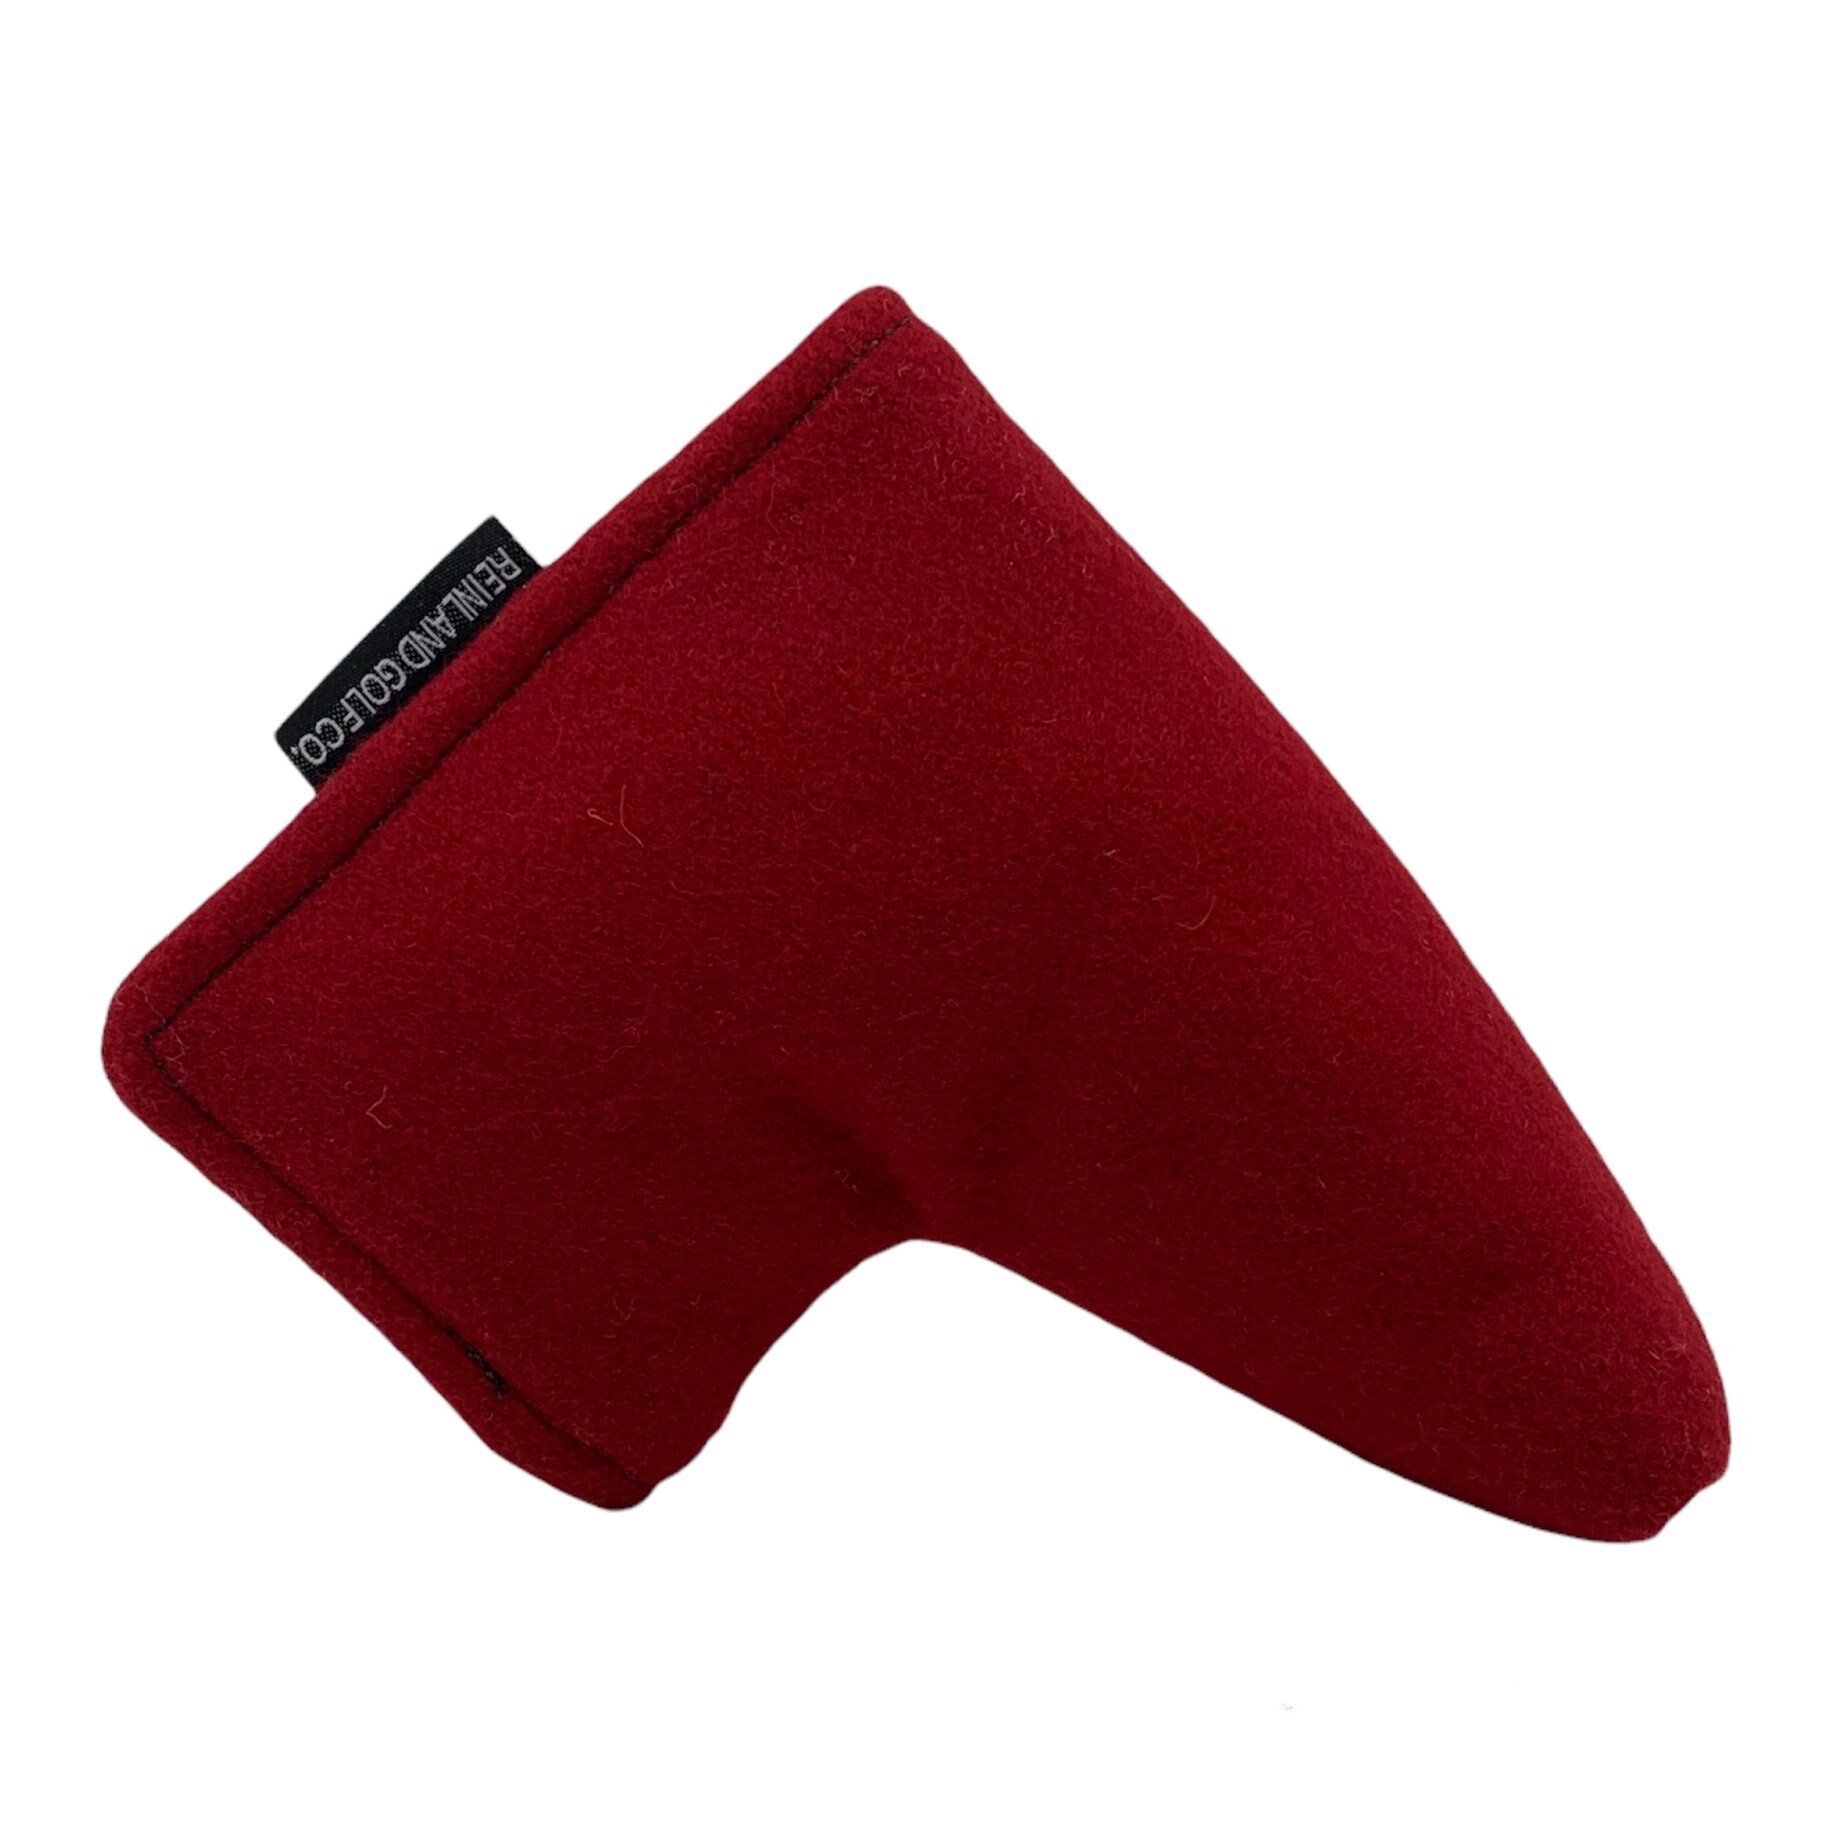 Red Leather Mallet Headcover - Ace of Clubs Golf Co.